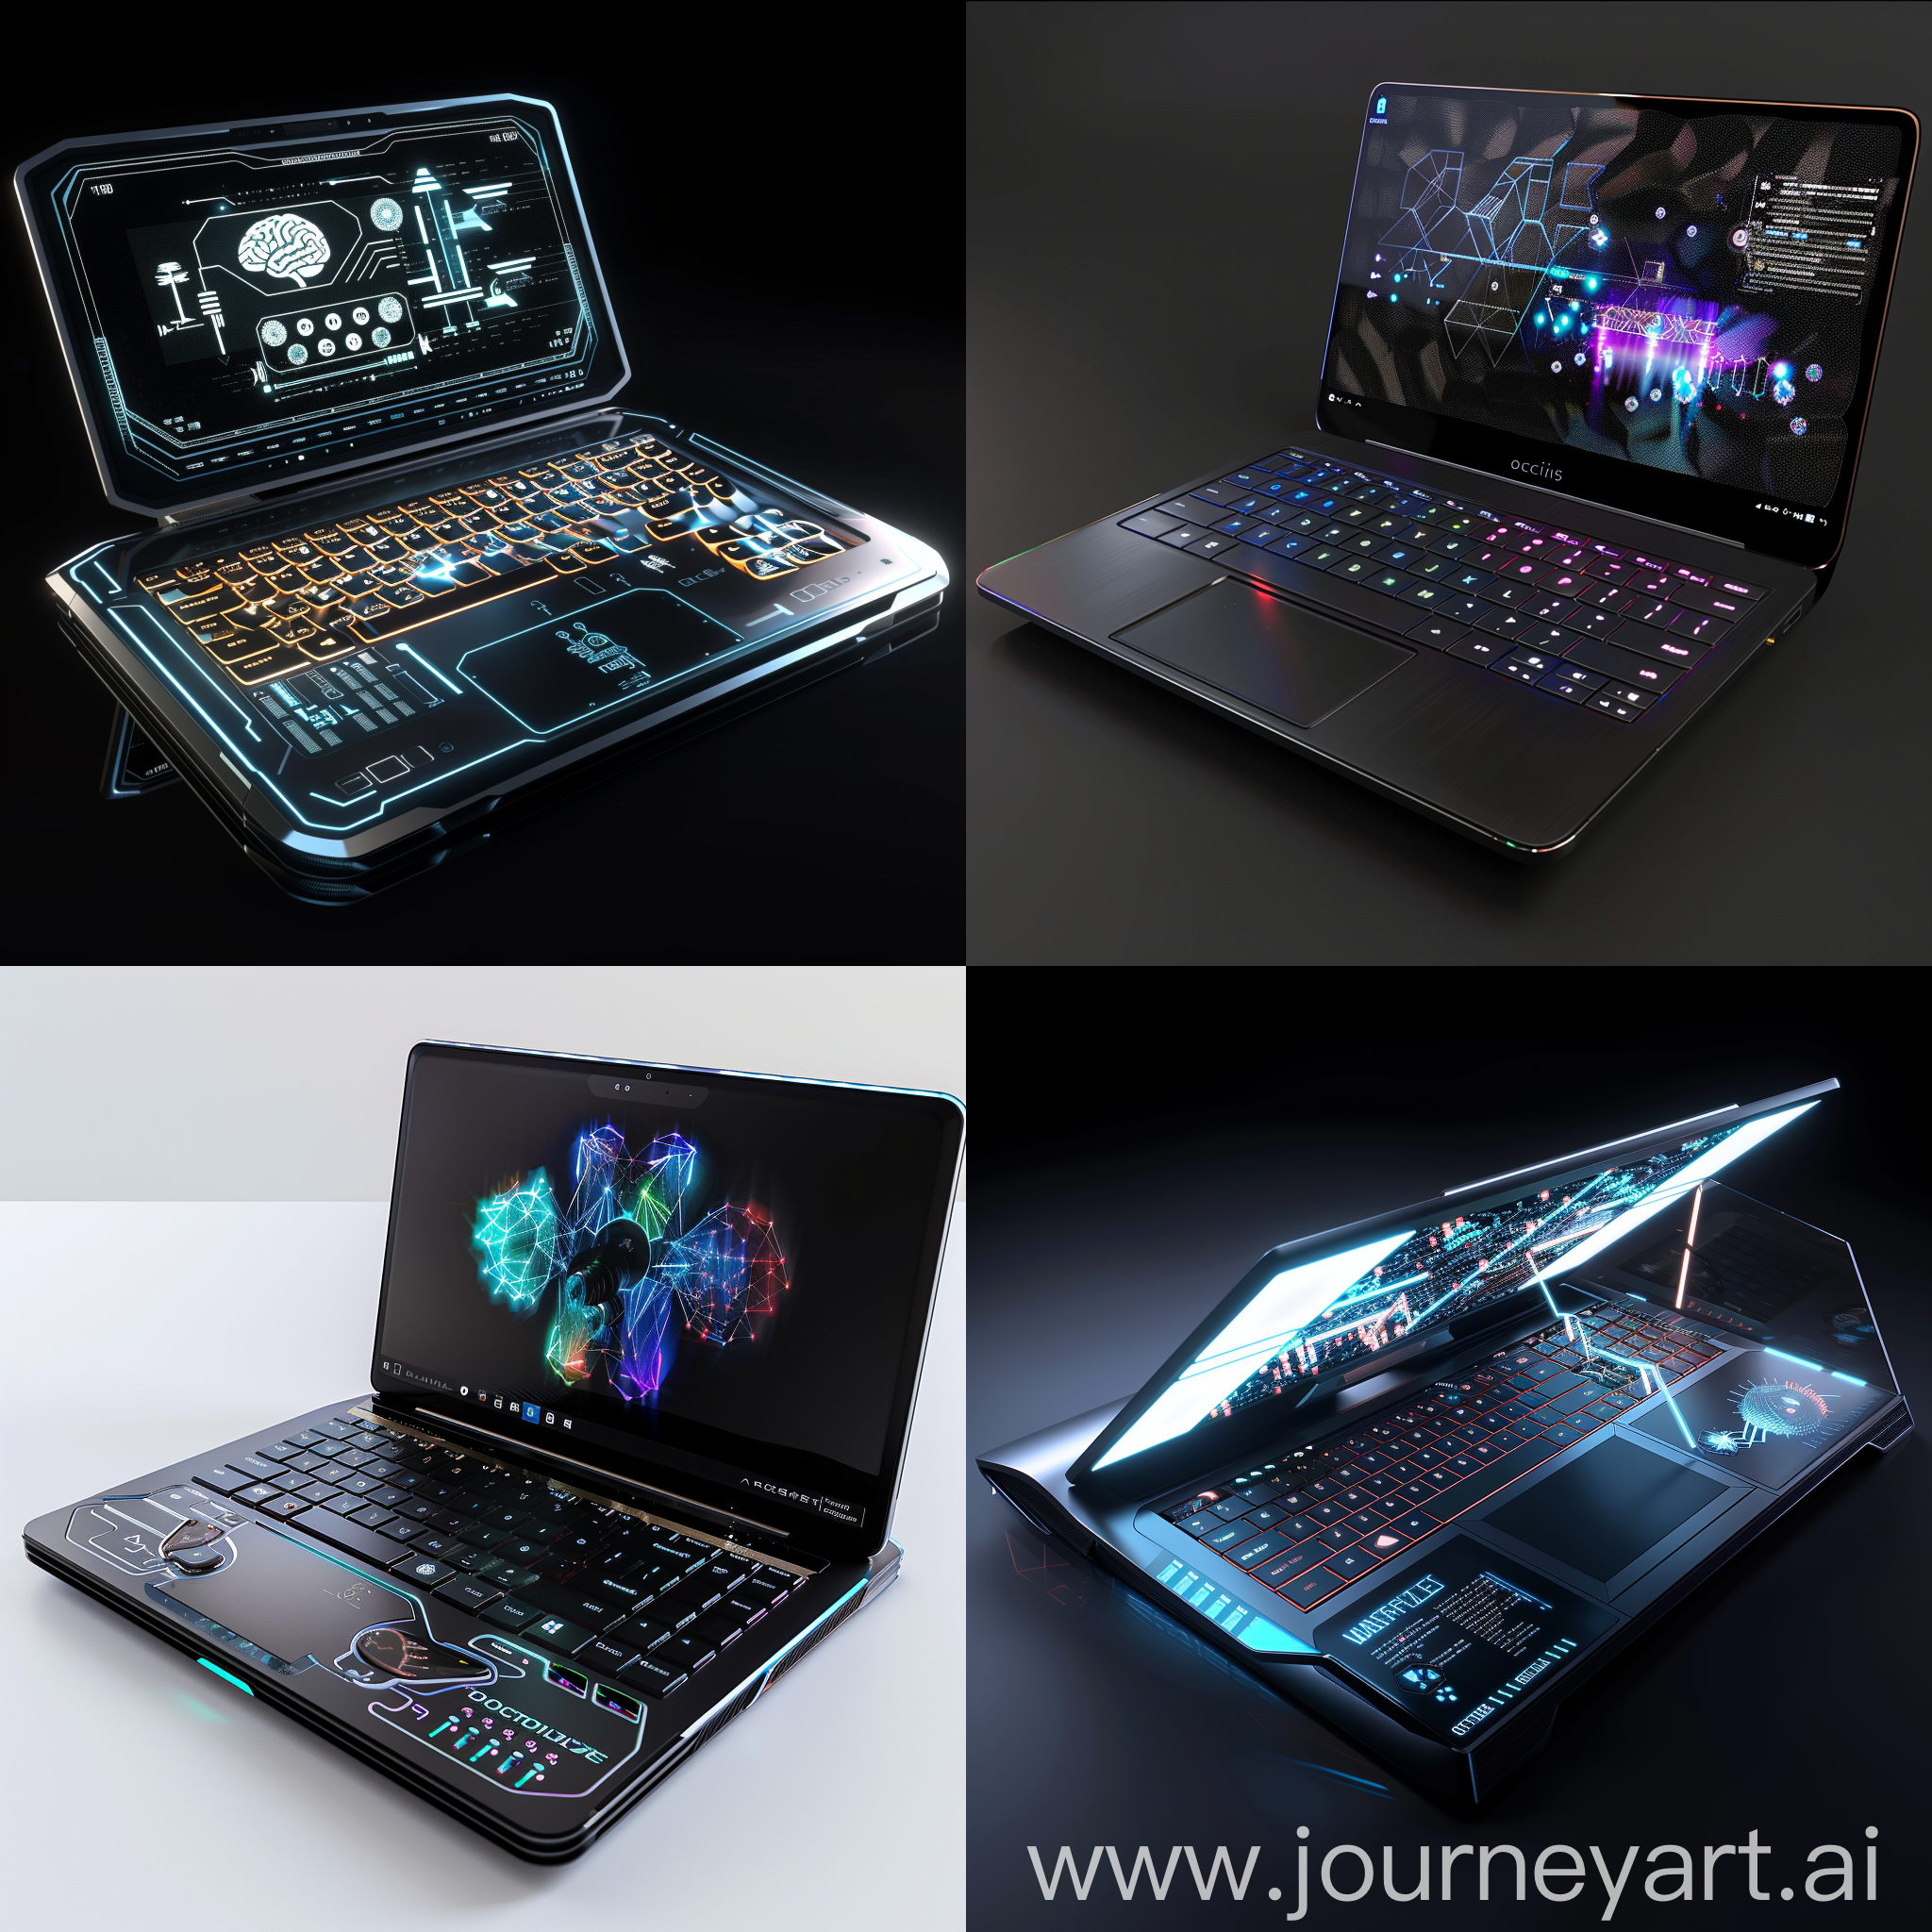 Ultramodern futuristic laptop, Morphing Display, Haptic Keyboard, Brain-Computer Interface (BCI) Integration, Augmented Reality (AR) Overlay, Self-Healing Materials, Ultra-Fast Wireless Charging, Holographic Projection, Advanced Security Features, Modular Design, AI-Powered Assistant, octane render--stylize 1000